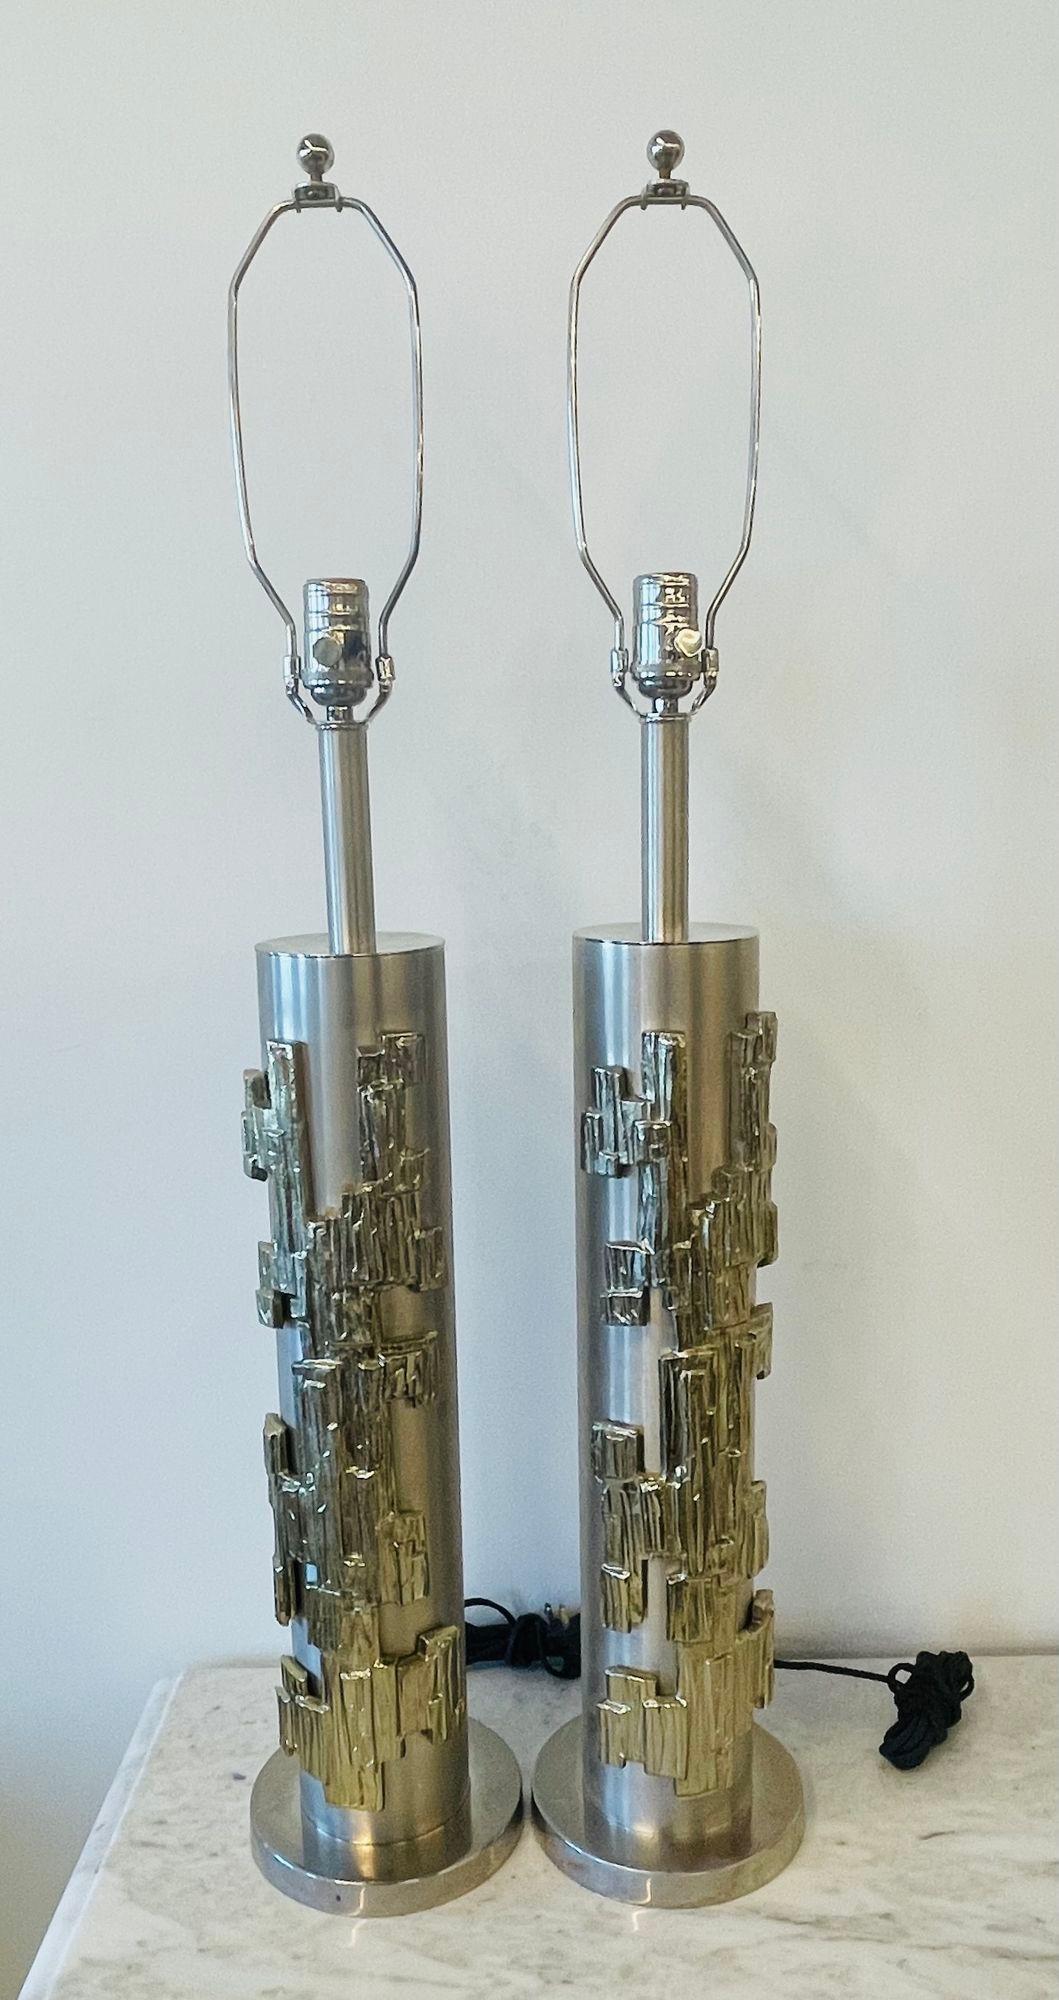 American Pair of Modernist Table Lamps, Brushed Nickel and Sculptural Metal, 1970s For Sale